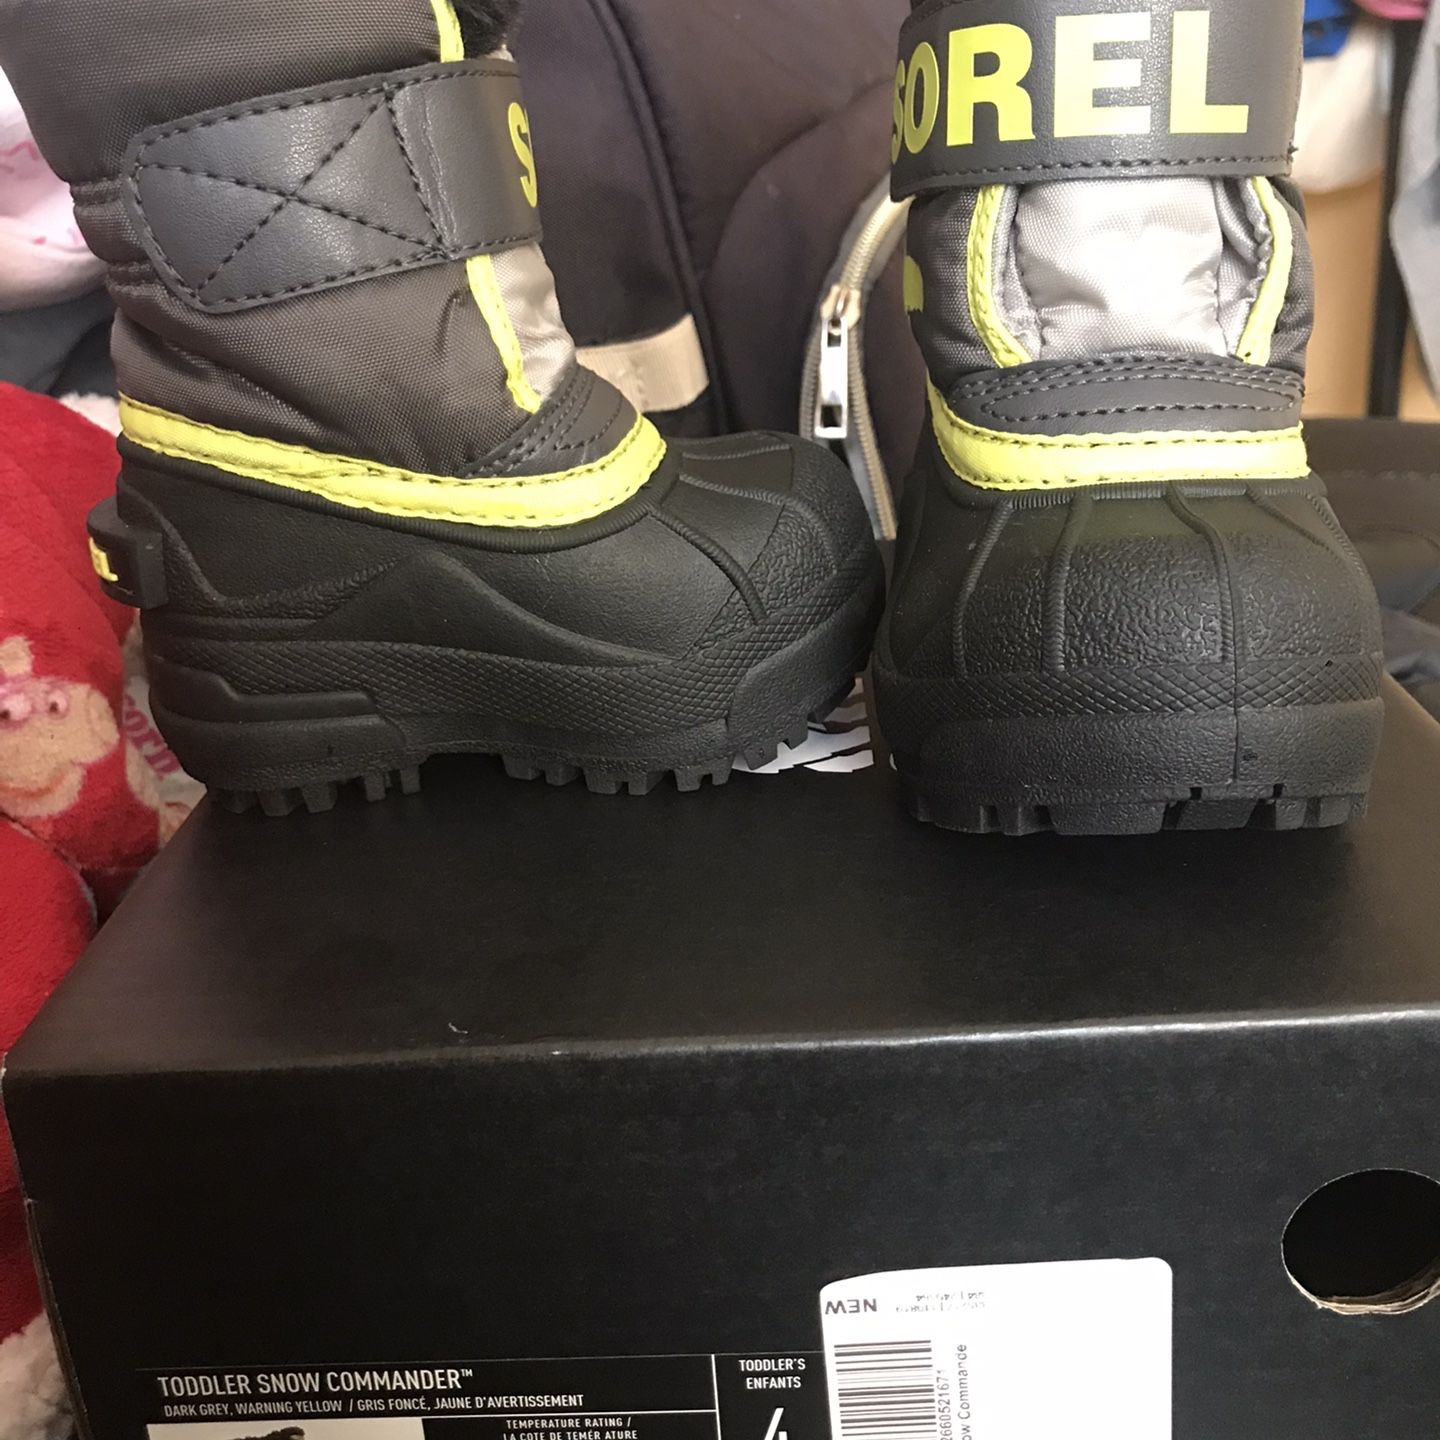 4t Toddler Sorel Snow Boots